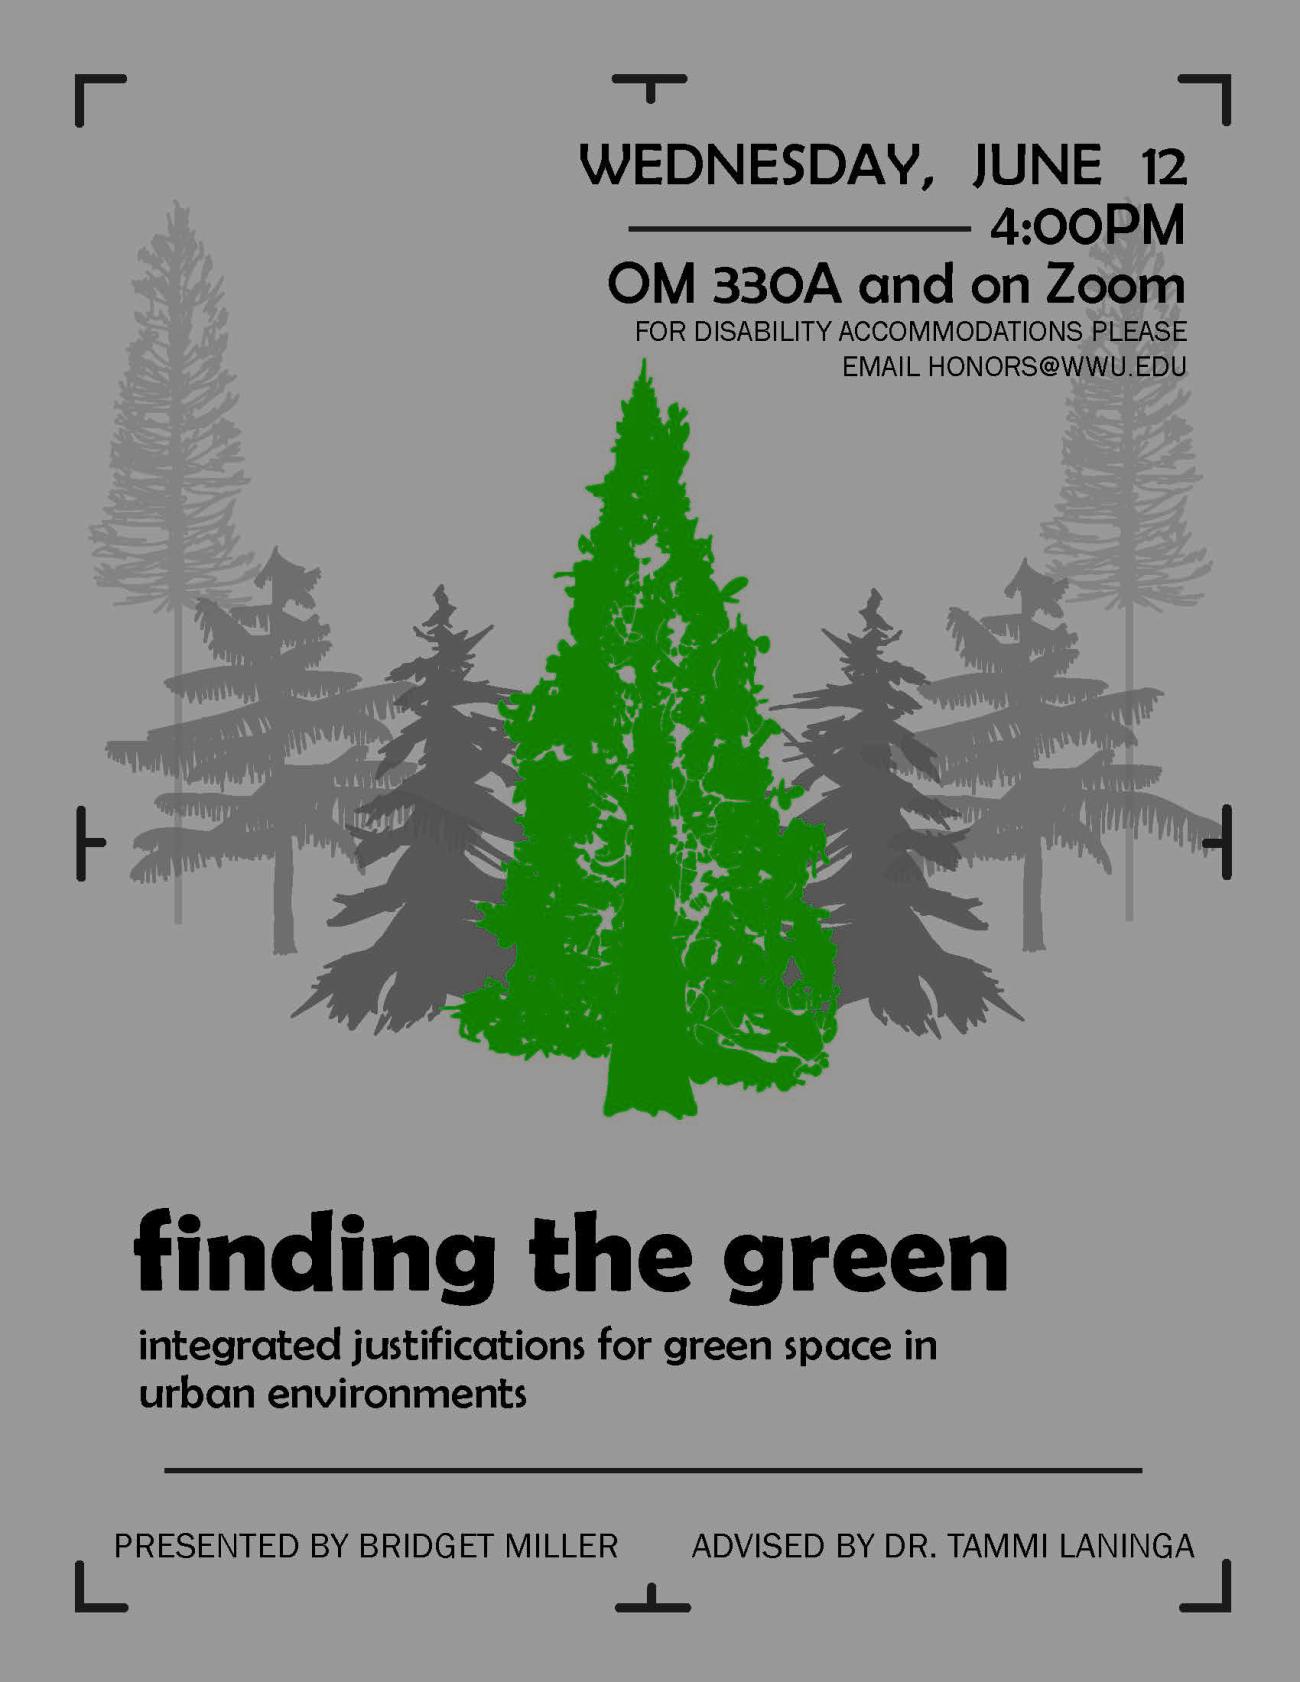 A gray background bordered with a digital camera’s focus box. Various conifer trees are aligned in a two-point perspective. All of the trees are different shades of gray apart from the tree in the foreground, which is a Giant Sequoia colored green. The text reads “Finding the green. Integrated justifications for green space in urban environments. Wednesday, June 12 4:00pm. OM 330A and on Zoom. For disability accommodations please email honors@wwu.edu. Presented by Bridget Miller.Advised by Dr. Tammi Laninga